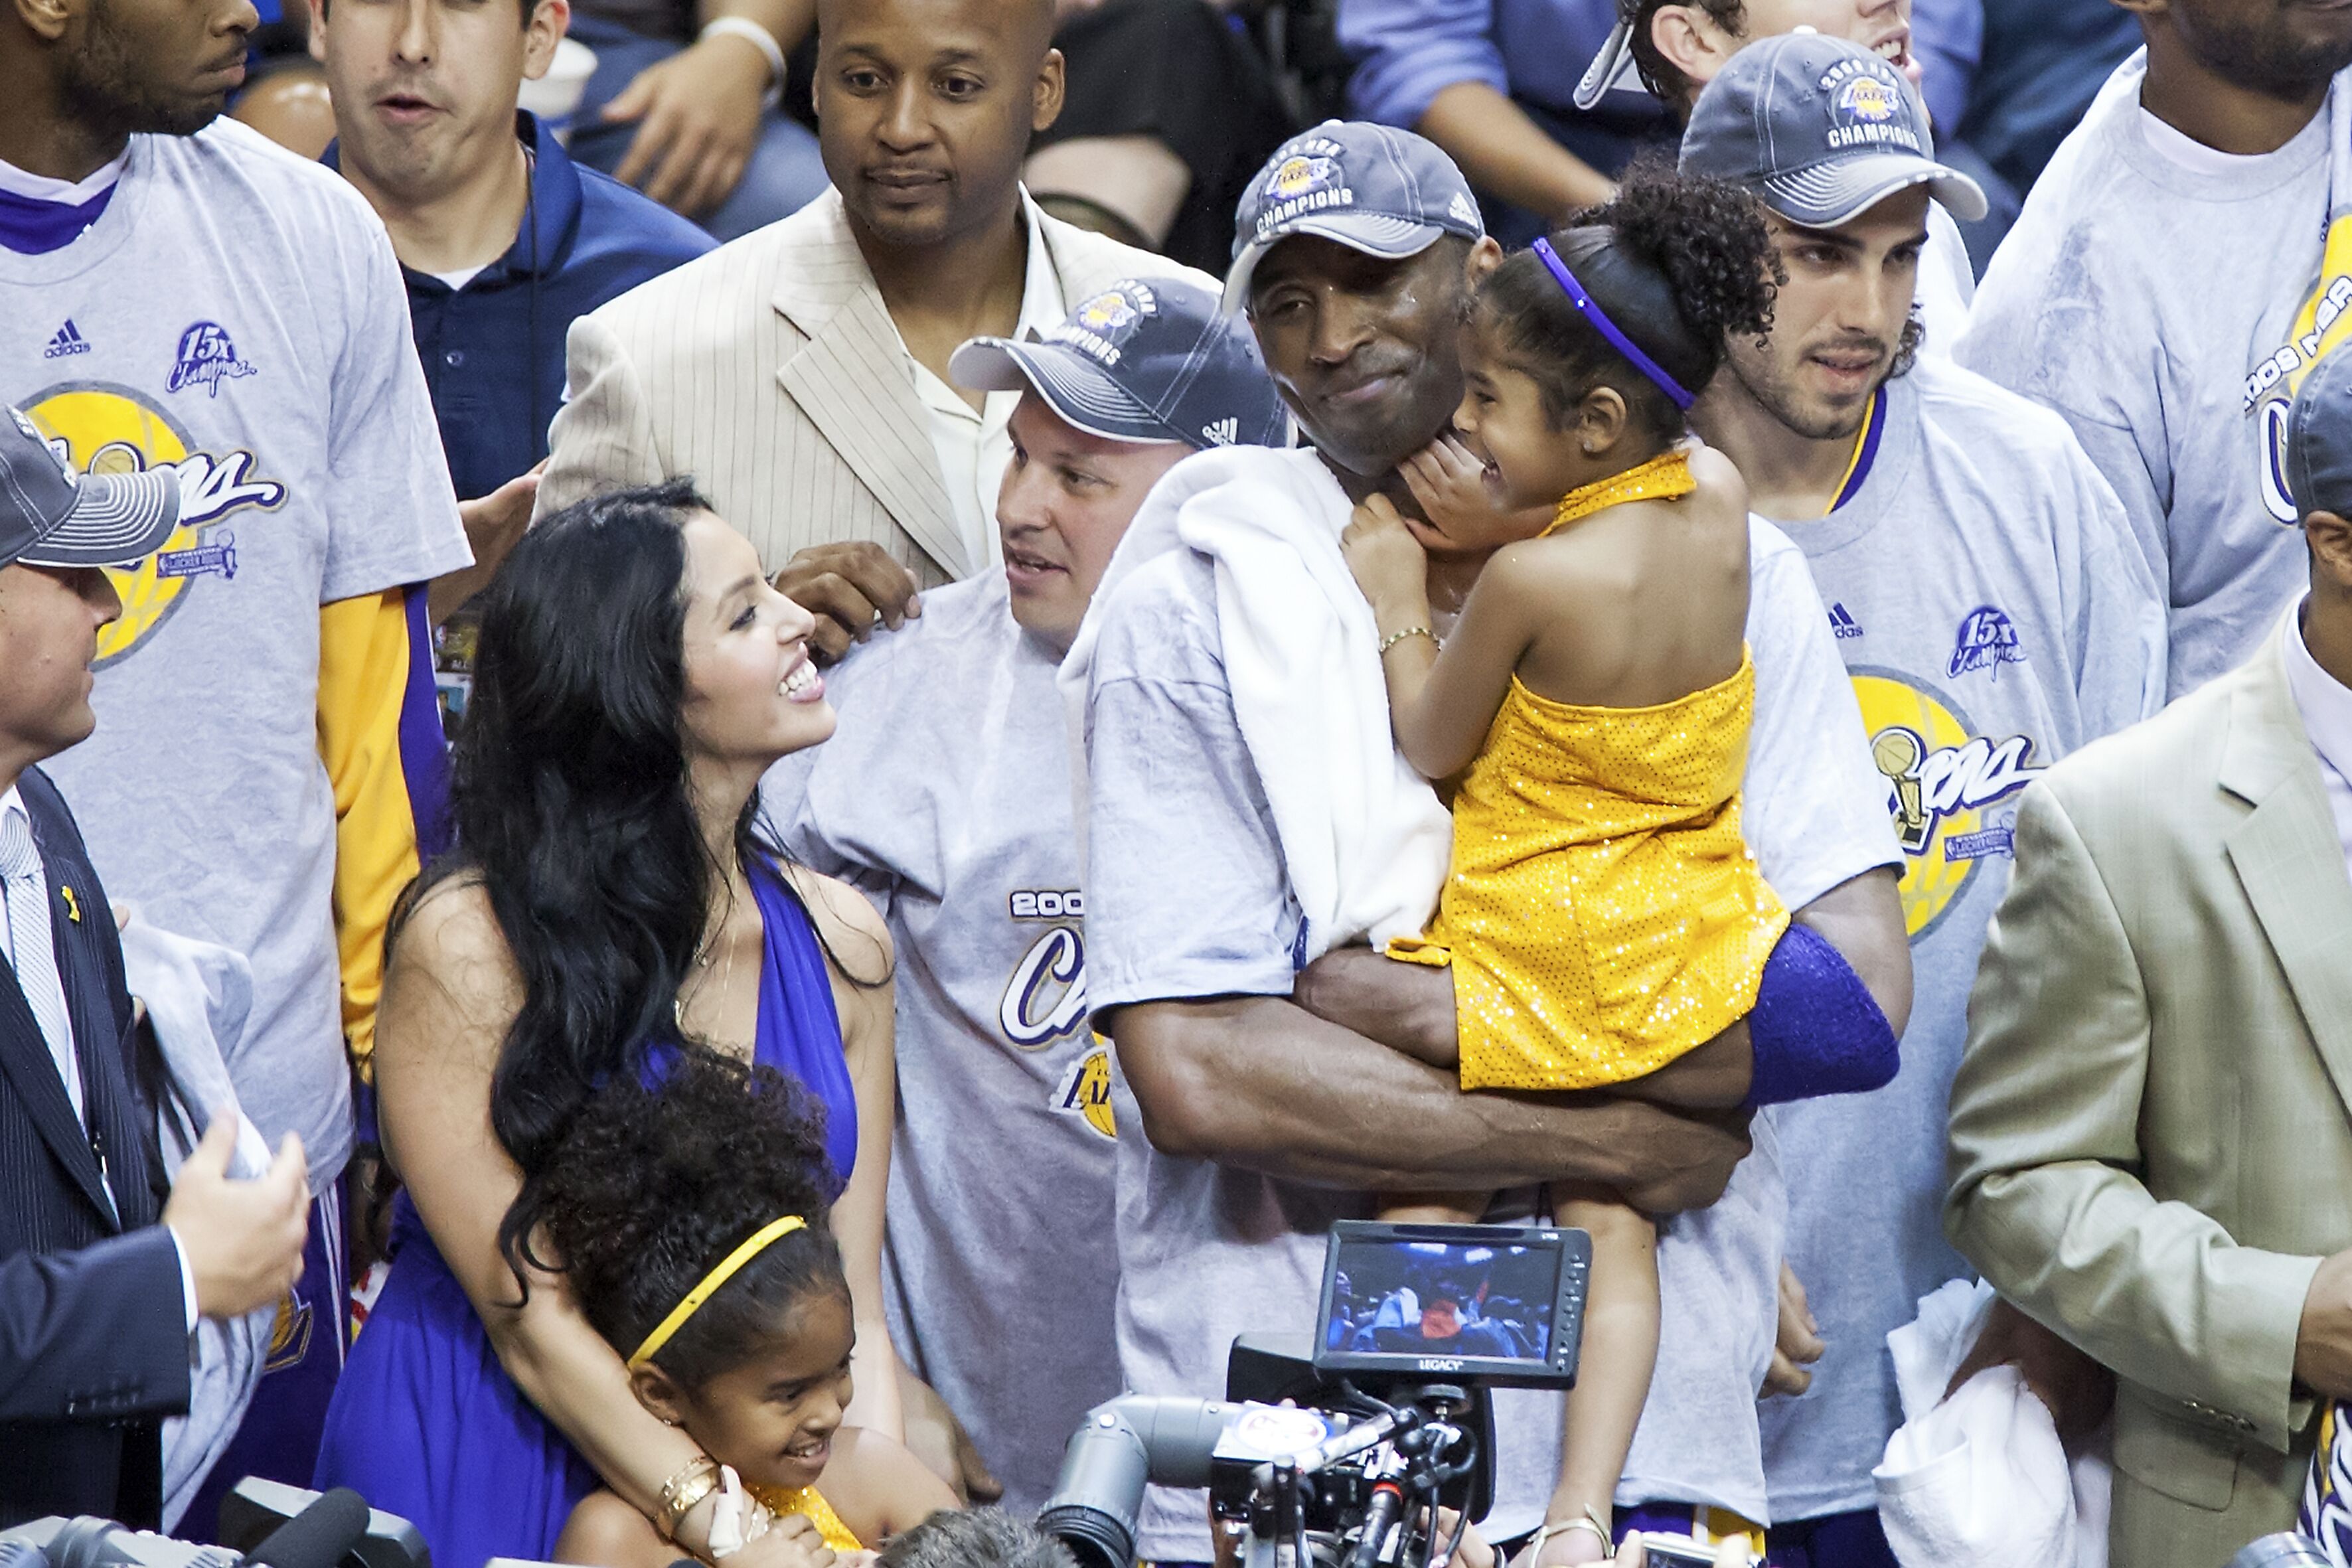 Kobe Bryant and Gianna, after the Lakers defeated the Orlando Magic 99-86 in Game Five of the 2009 NBA Finals. | Source: Getty Images